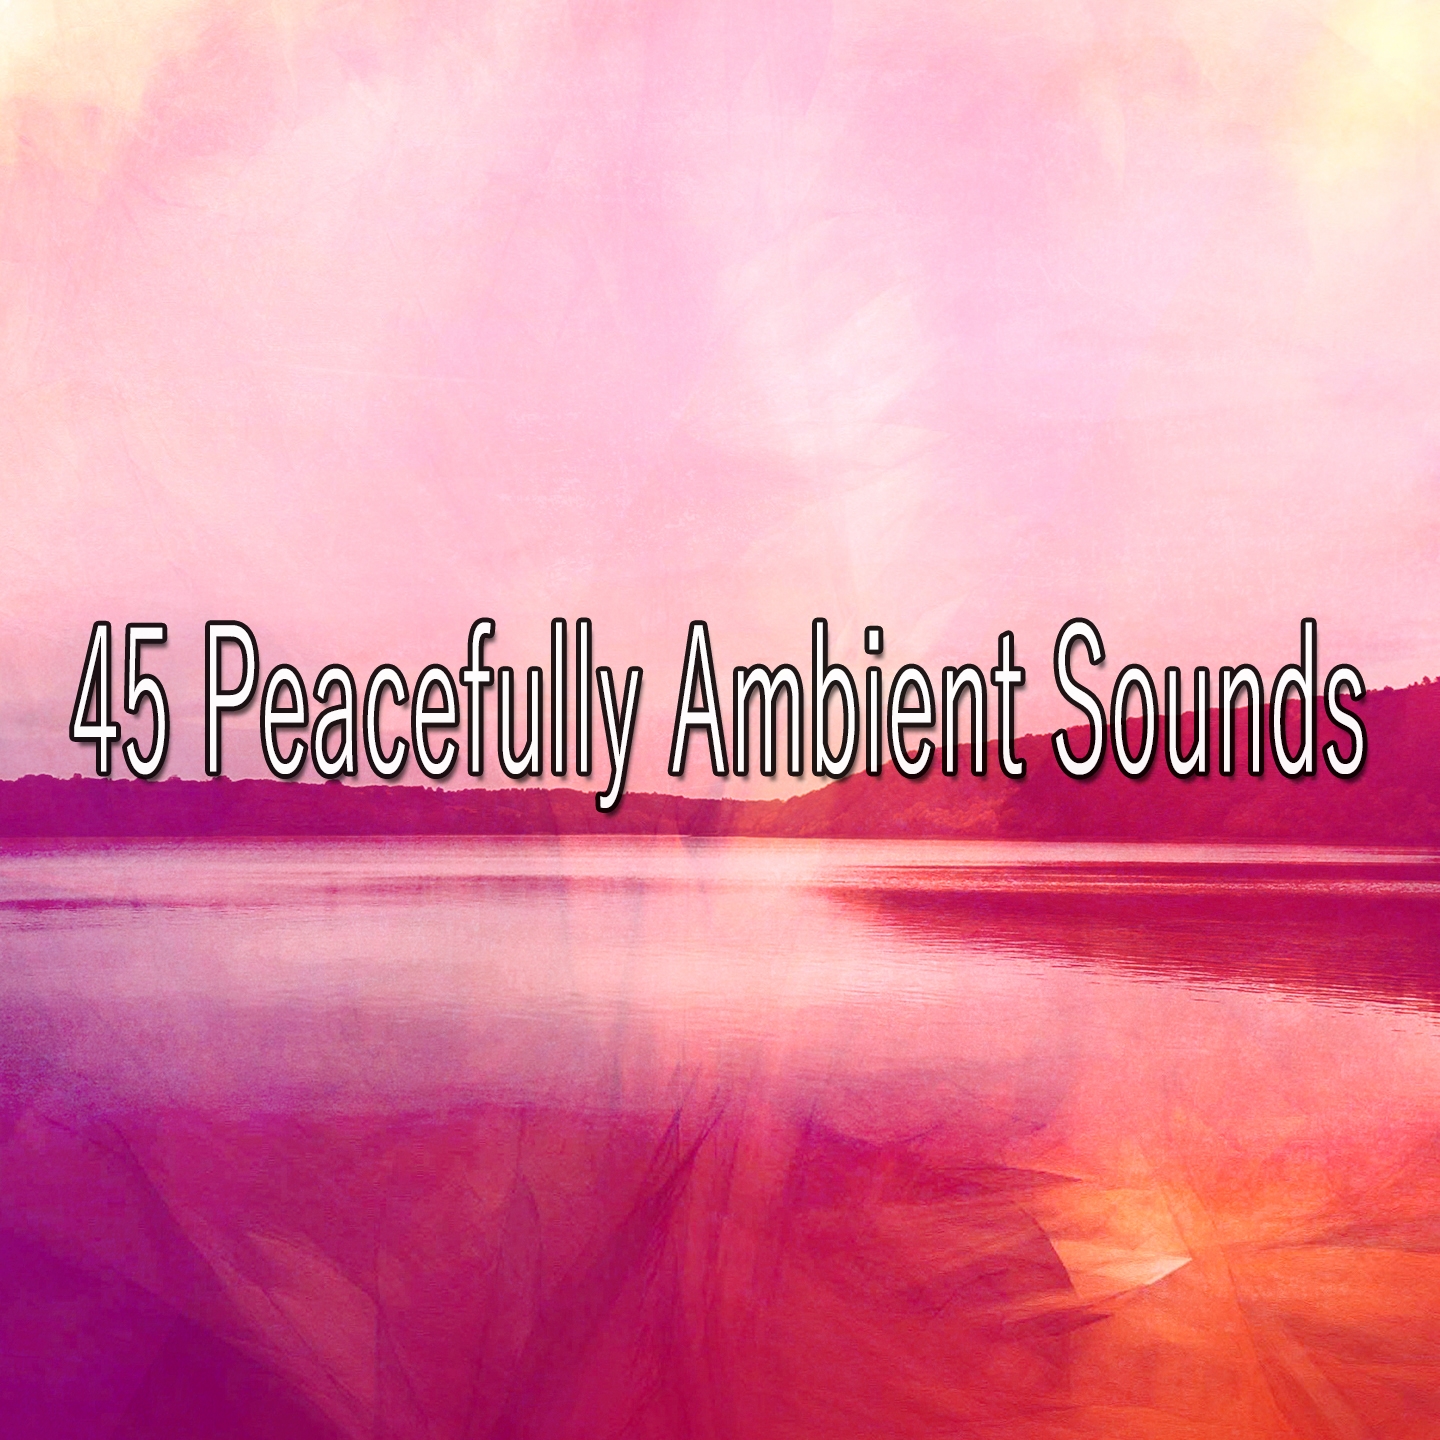 45 Peacefully Ambient Sounds